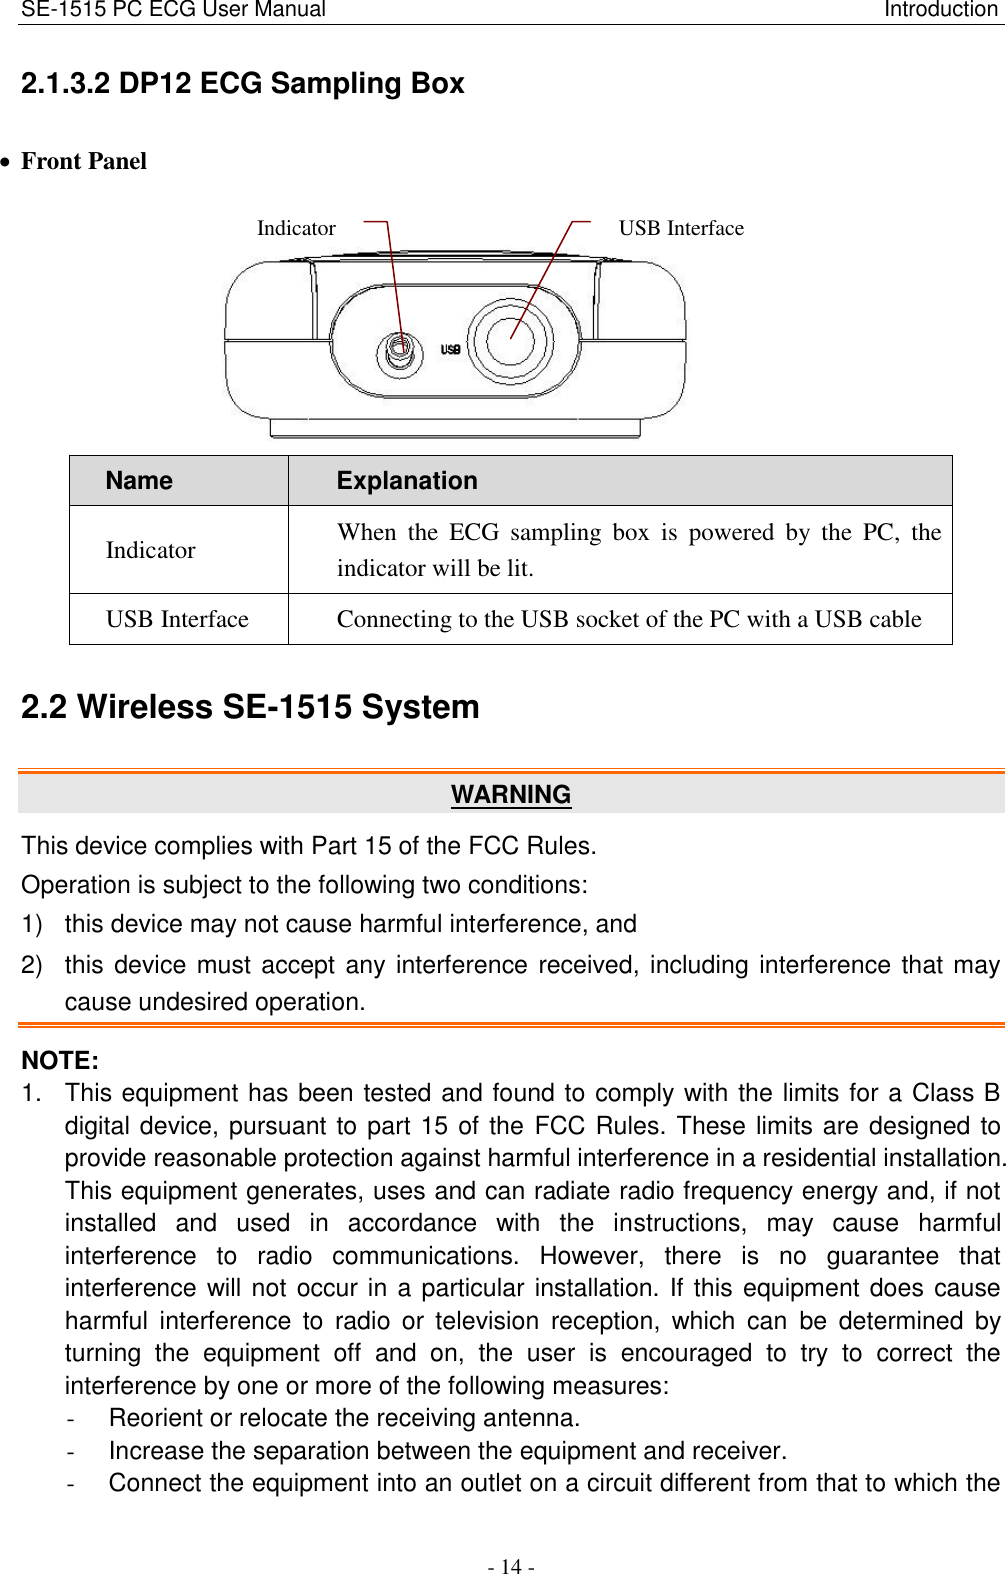 SE-1515 PC ECG User Manual                                                                                                   Introduction - 14 - 2.1.3.2 DP12 ECG Sampling Box  Front Panel  Name Explanation Indicator When  the  ECG  sampling  box  is  powered  by  the  PC,  the indicator will be lit. USB Interface Connecting to the USB socket of the PC with a USB cable 2.2 Wireless SE-1515 System WARNING This device complies with Part 15 of the FCC Rules. Operation is subject to the following two conditions:     1)  this device may not cause harmful interference, and   2)  this device must accept any interference received, including interference that may cause undesired operation. NOTE: 1.  This equipment has been tested and found to comply with the limits for a Class B digital device, pursuant to part 15 of the  FCC Rules. These limits are designed to provide reasonable protection against harmful interference in a residential installation. This equipment generates, uses and can radiate radio frequency energy and, if not installed  and  used  in  accordance  with  the  instructions,  may  cause  harmful interference  to  radio  communications.  However,  there  is  no  guarantee  that interference will not occur in a particular installation. If this equipment does cause harmful  interference  to  radio  or  television  reception,  which  can  be  determined  by turning  the  equipment  off  and  on,  the  user  is  encouraged  to  try  to  correct  the interference by one or more of the following measures: -  Reorient or relocate the receiving antenna. -  Increase the separation between the equipment and receiver. -  Connect the equipment into an outlet on a circuit different from that to which the Indicator USB Interface 